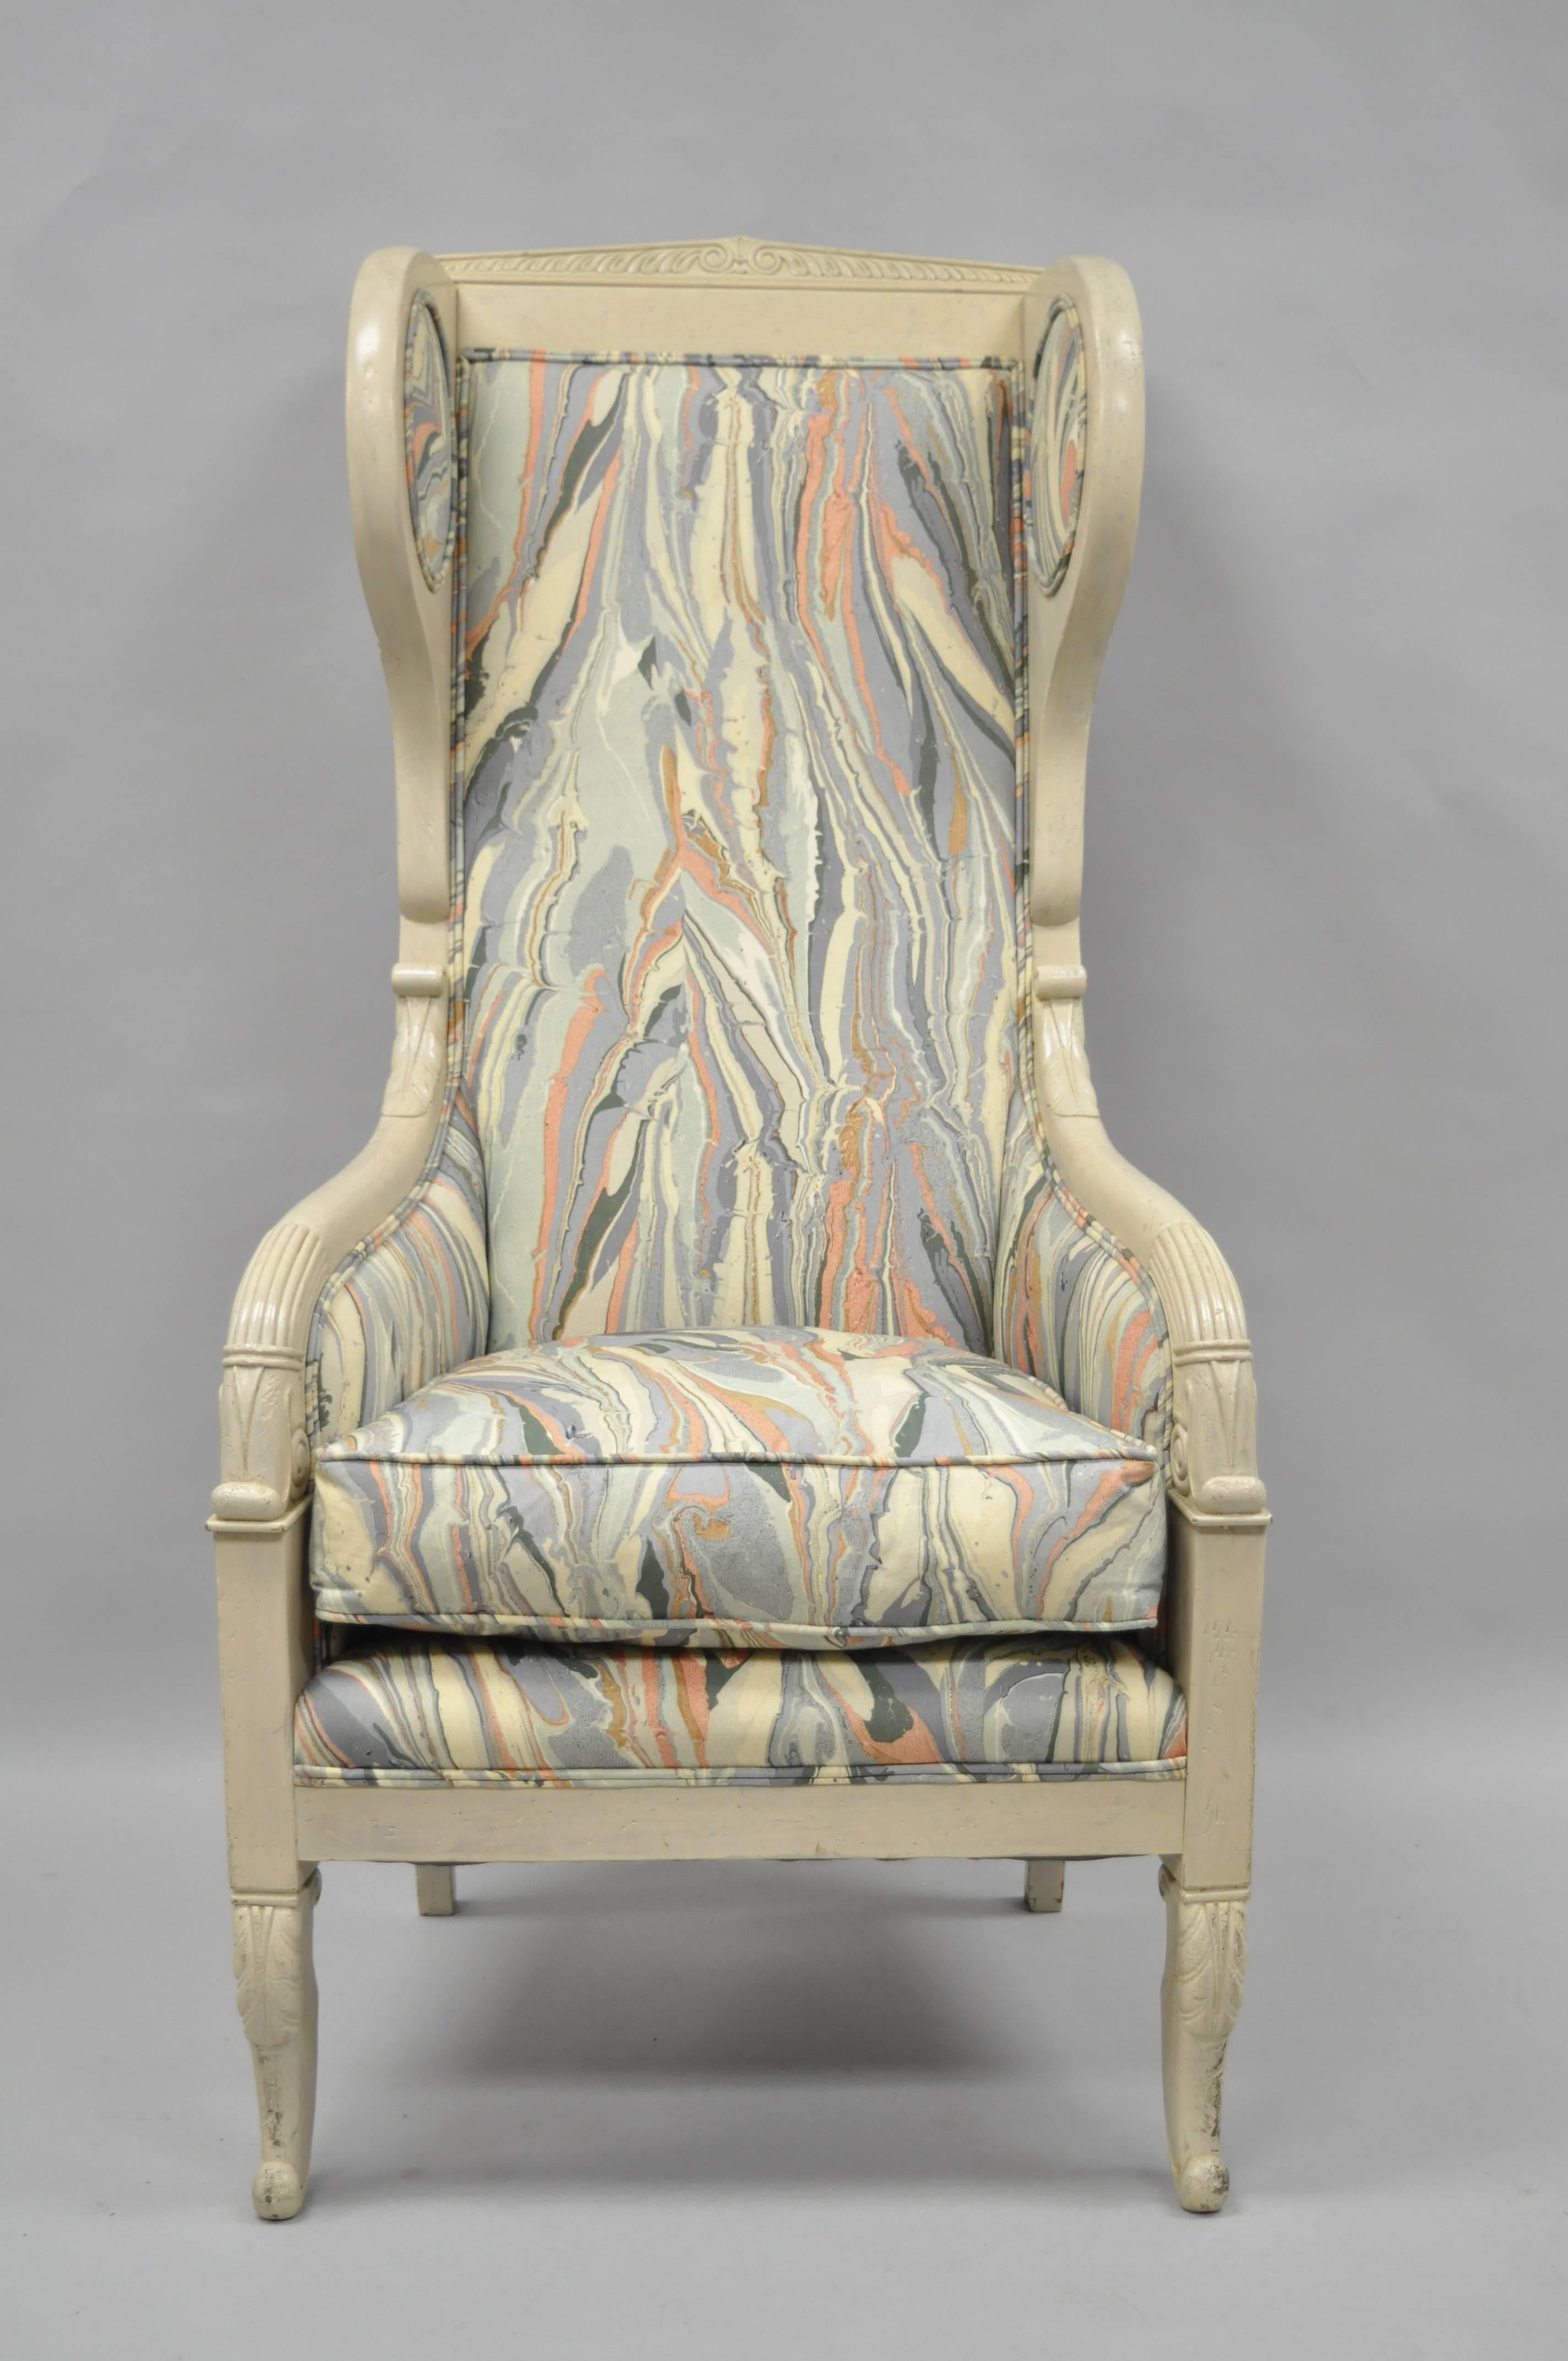 Vintage high back French Empire / neoclassical style lounge chair with marbled fabric. Item features a tall solid carved wood frame, unique upholstered wings, shapely legs, cream distressed finish, and multi-color marbled fabric with pinks, blues,